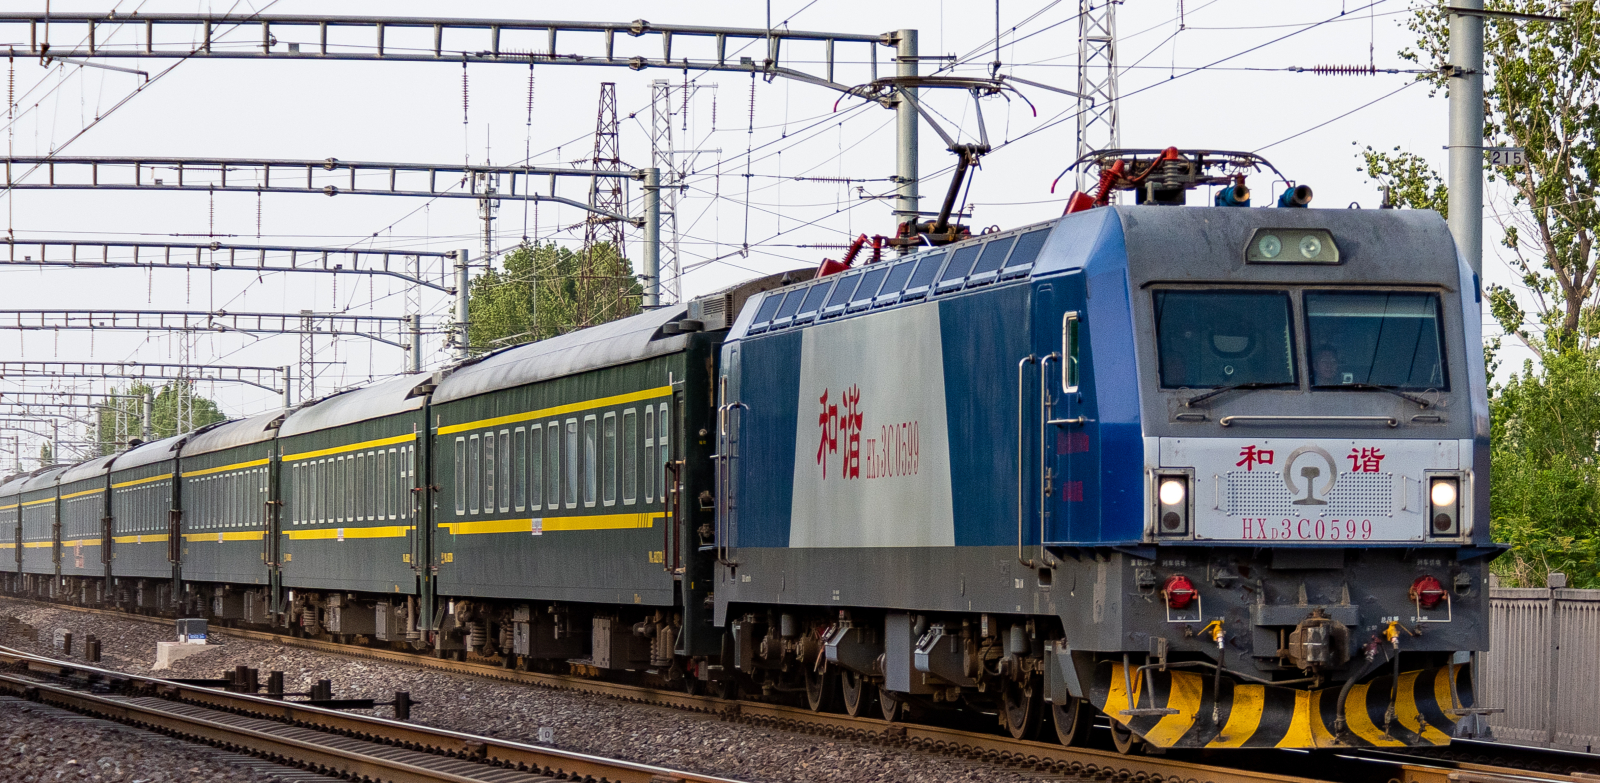 HXD3C 0599 in May 2021 at Changyangcun